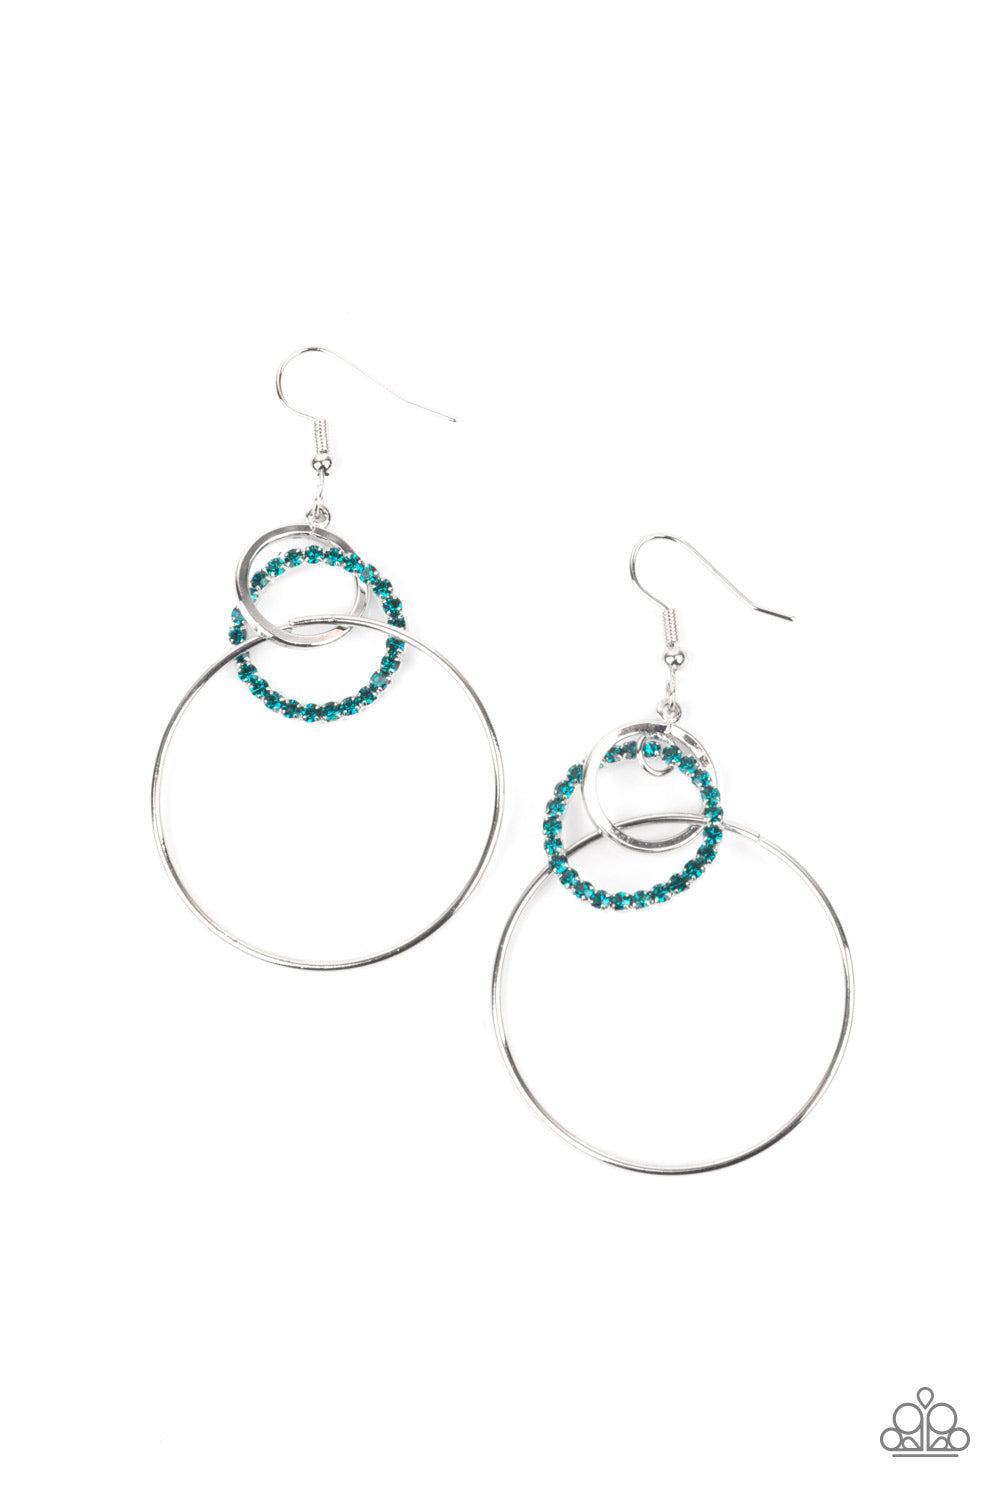 In An Orderly Fashion - Blue Earrings - Princess Glam Shop